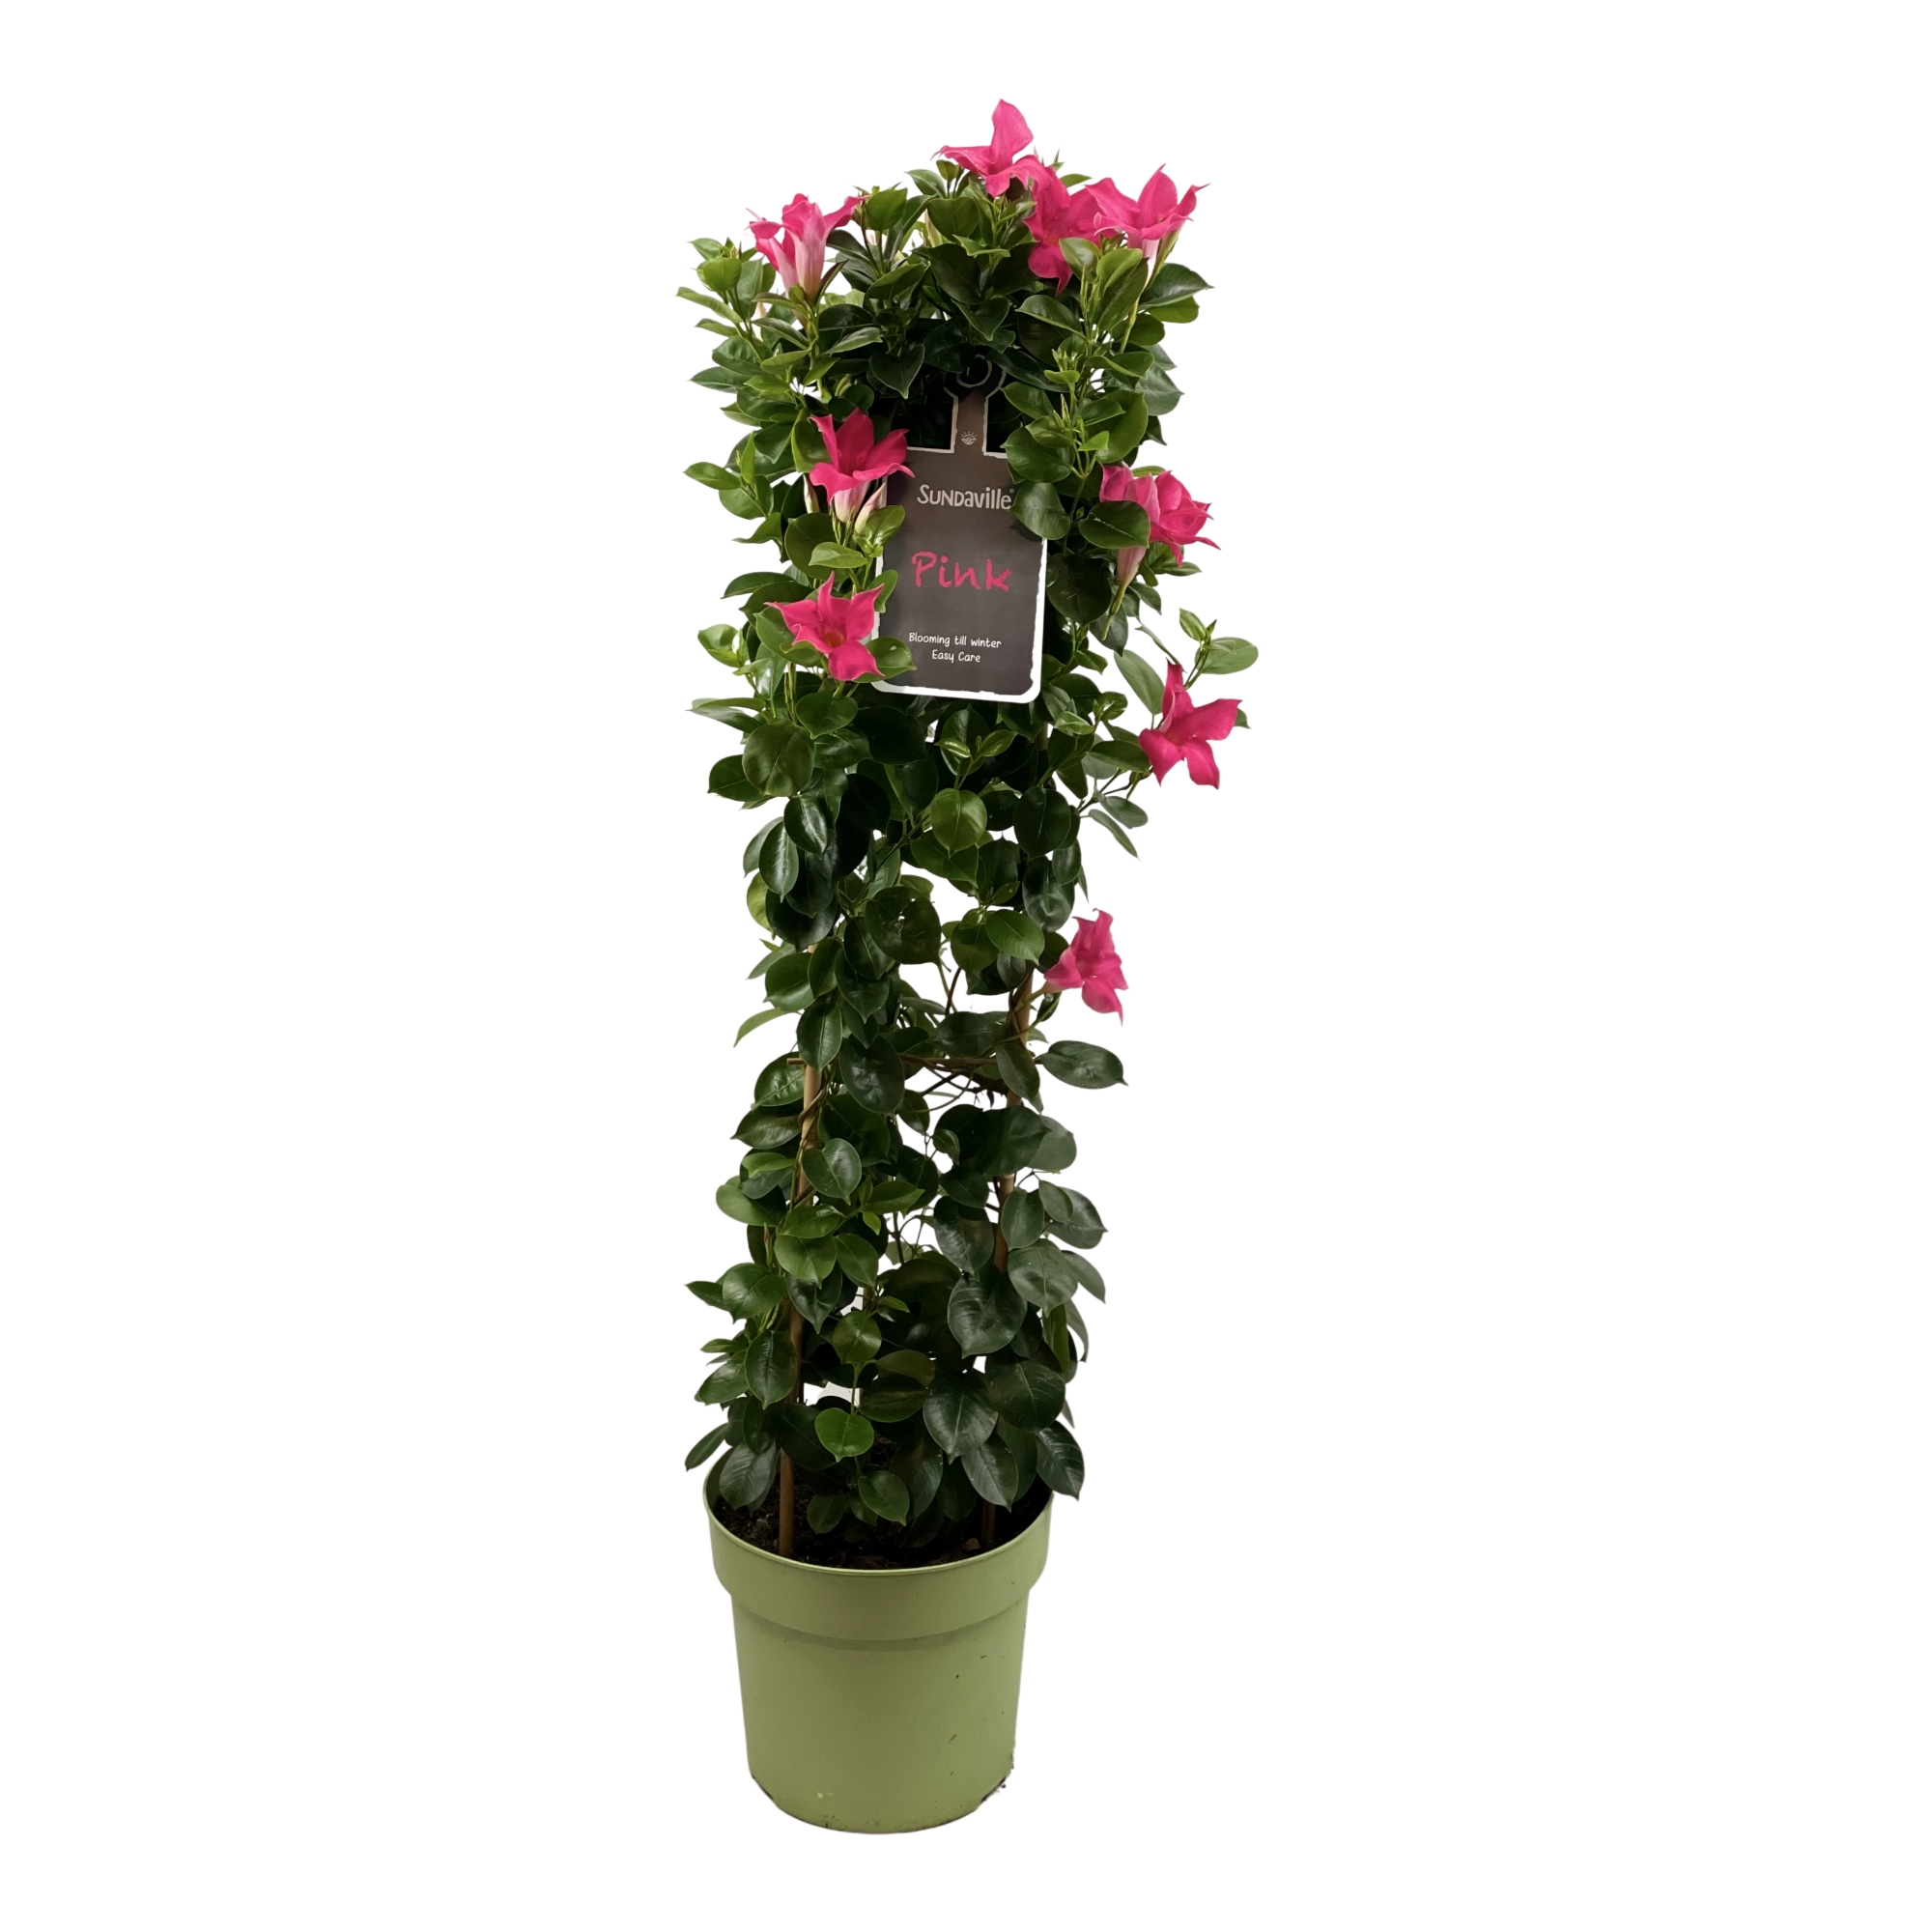 Mandevilla high pink petals, green leaves, green flower pot, tag with text